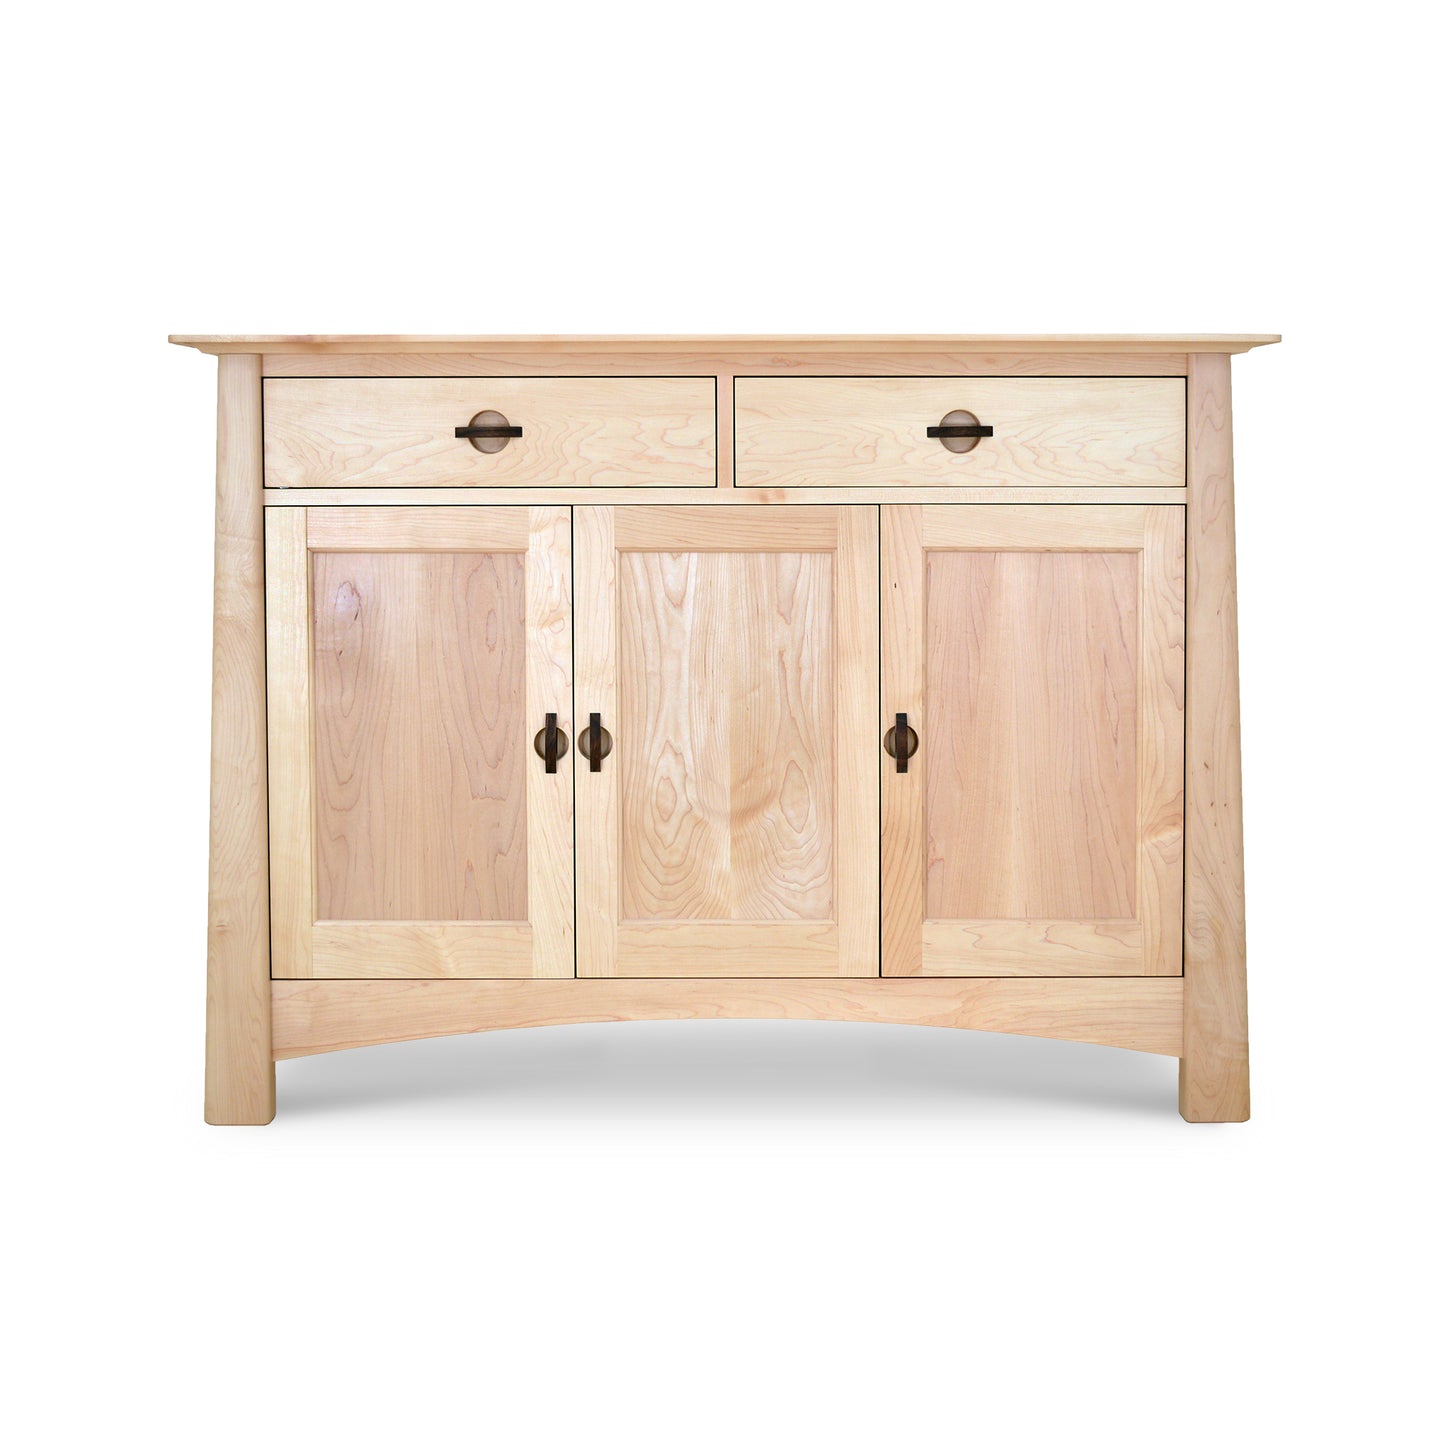 A Cherry Moon Medium Sideboard from Maple Corner Woodworks, with three doors and two drawers, featuring metal handles, isolated on a white background. The wood has a light Cherry Moon finish.